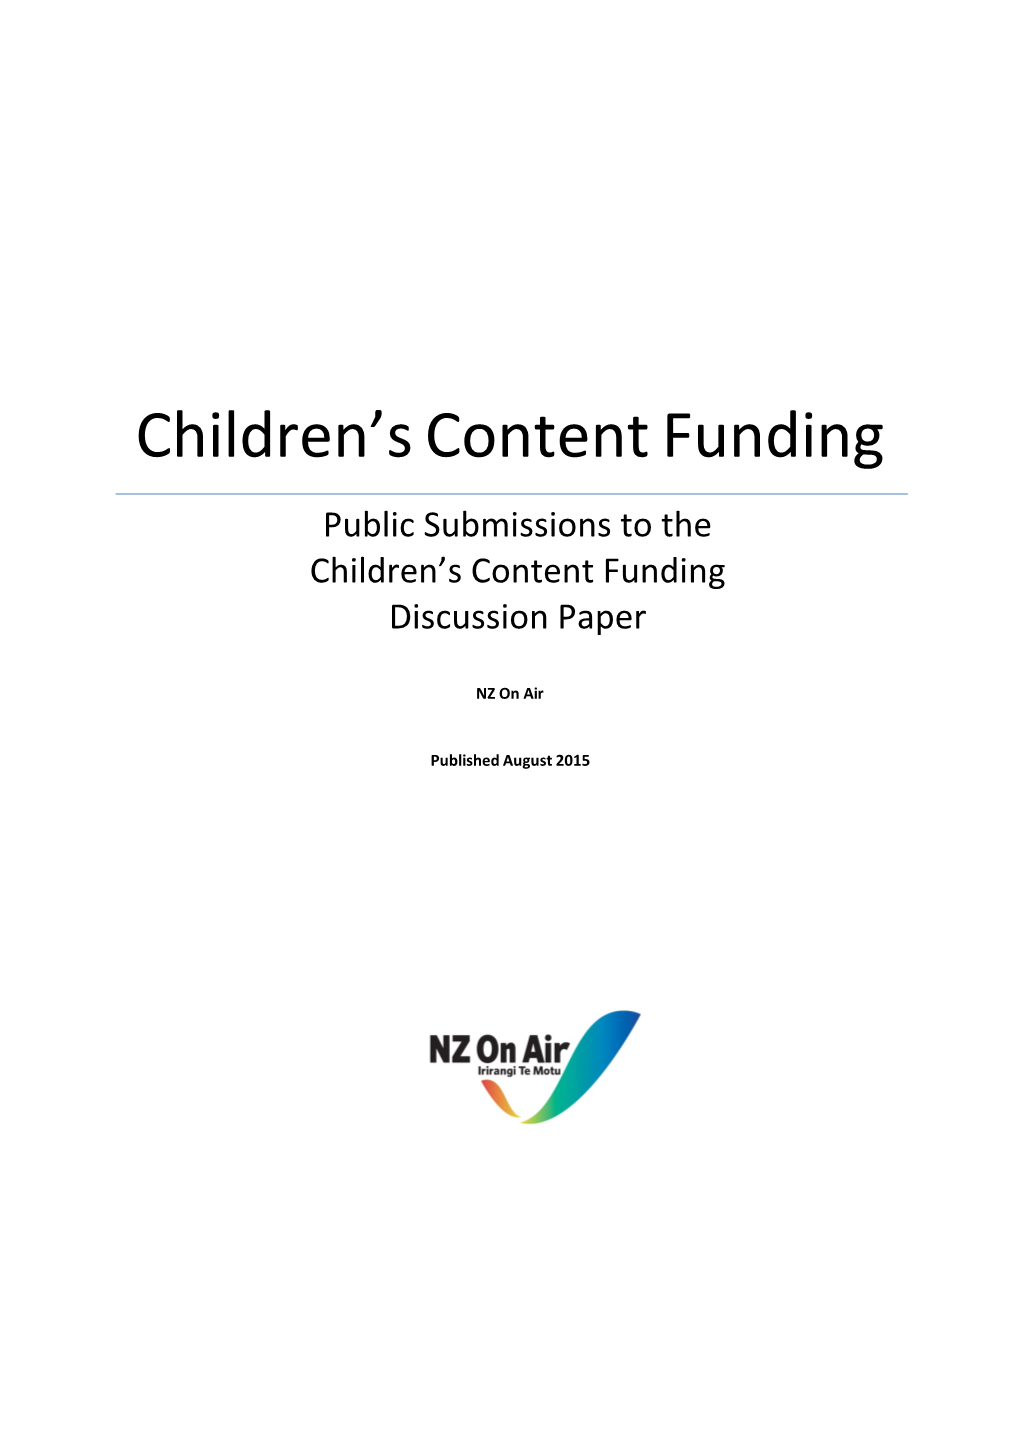 Public Submissions to the Children's Content Funding Discussion Paper